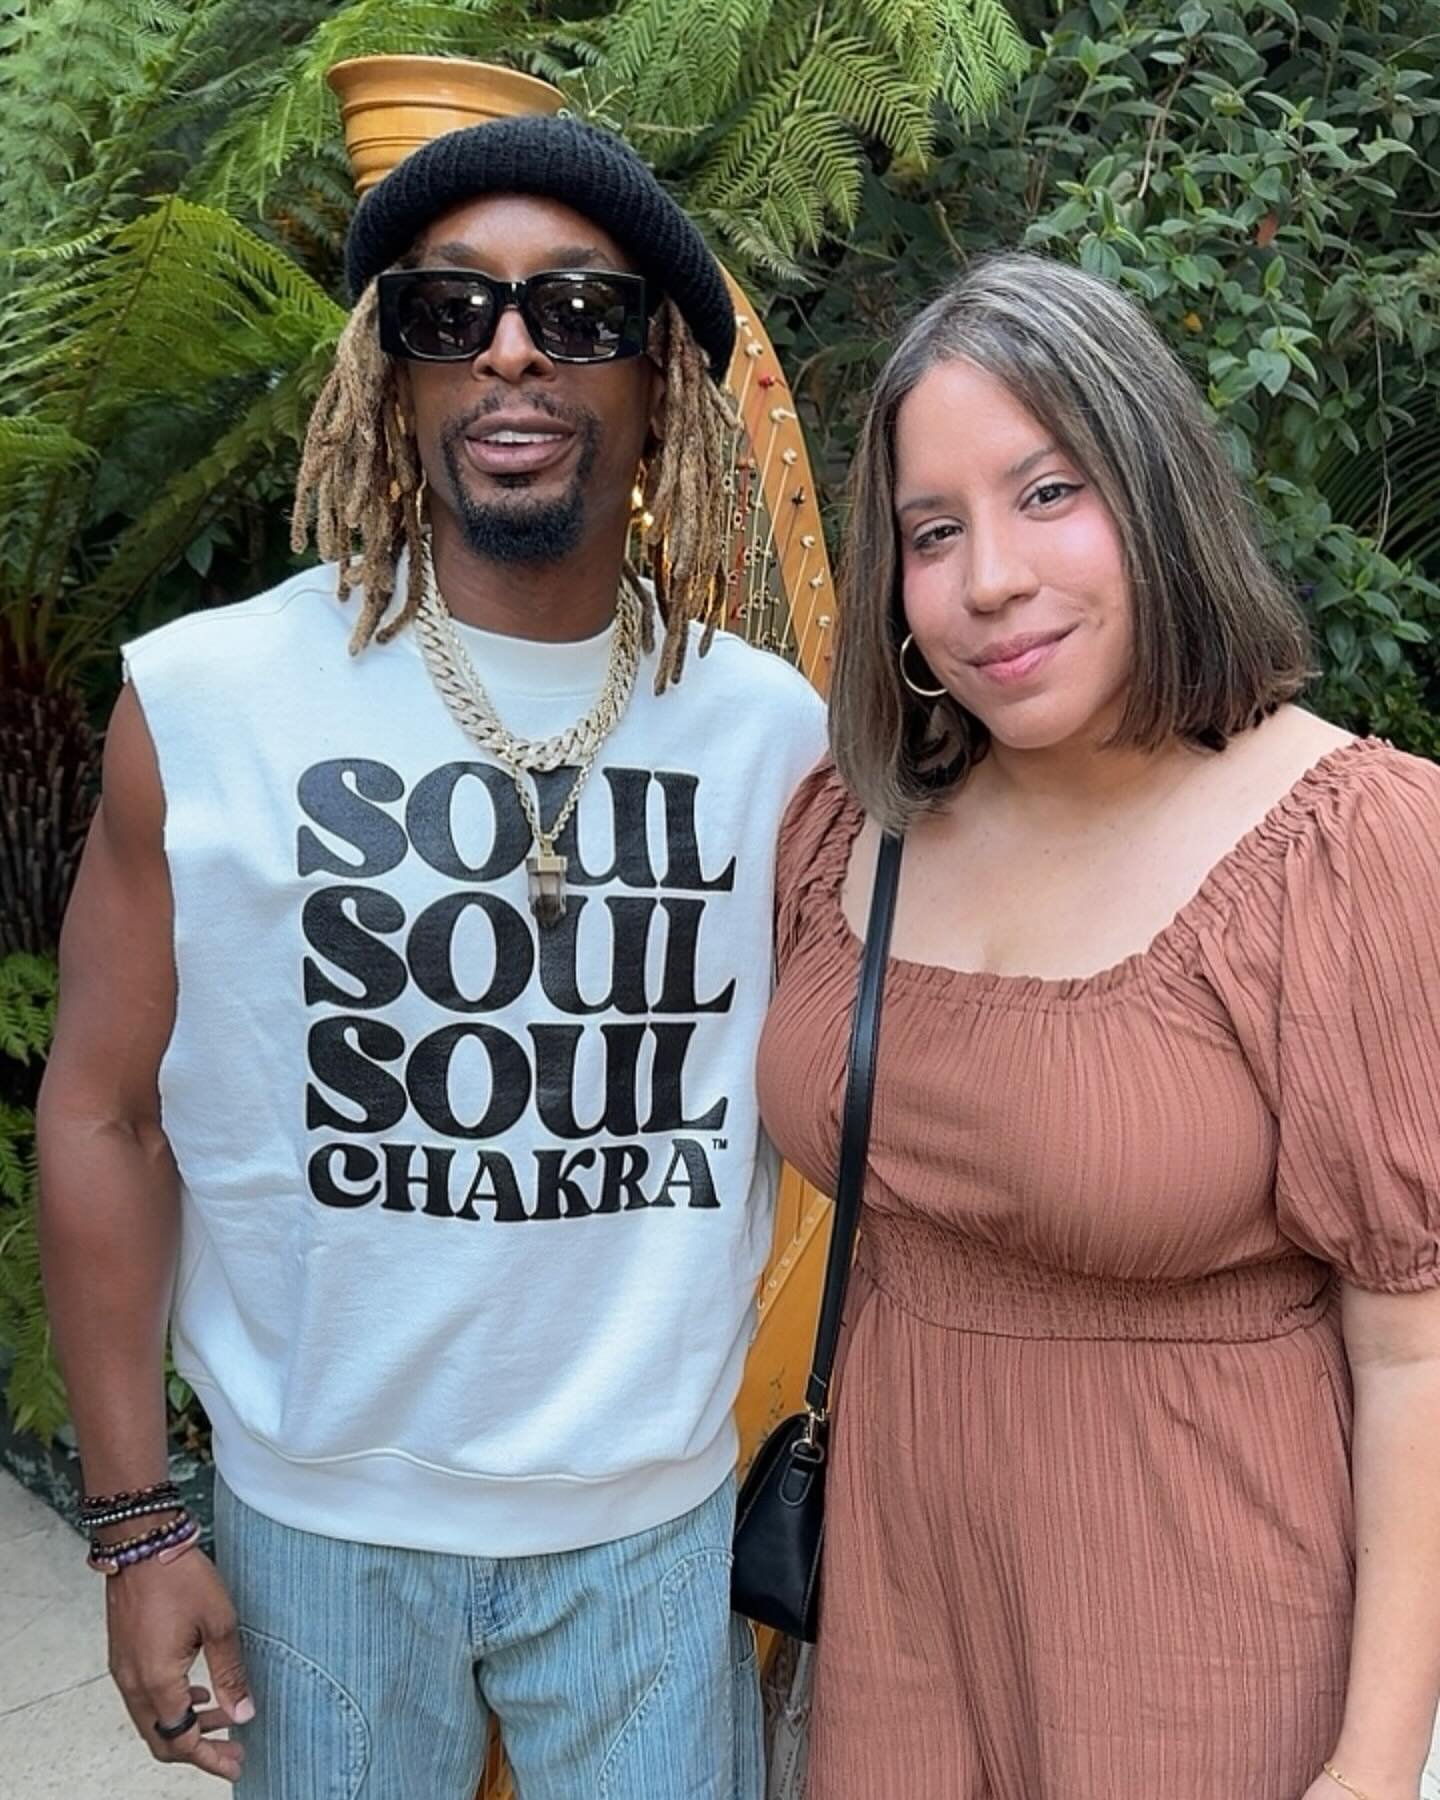 We all know @liljon for his hits &ldquo;Turn Down For What&rdquo; &ldquo;Shots&rdquo; and &ldquo;Get Low&rdquo; but as of two years ago, he started focusing on his #mentalhealth and meditating.🫀 Today, we celebrated the release of his 2nd meditation